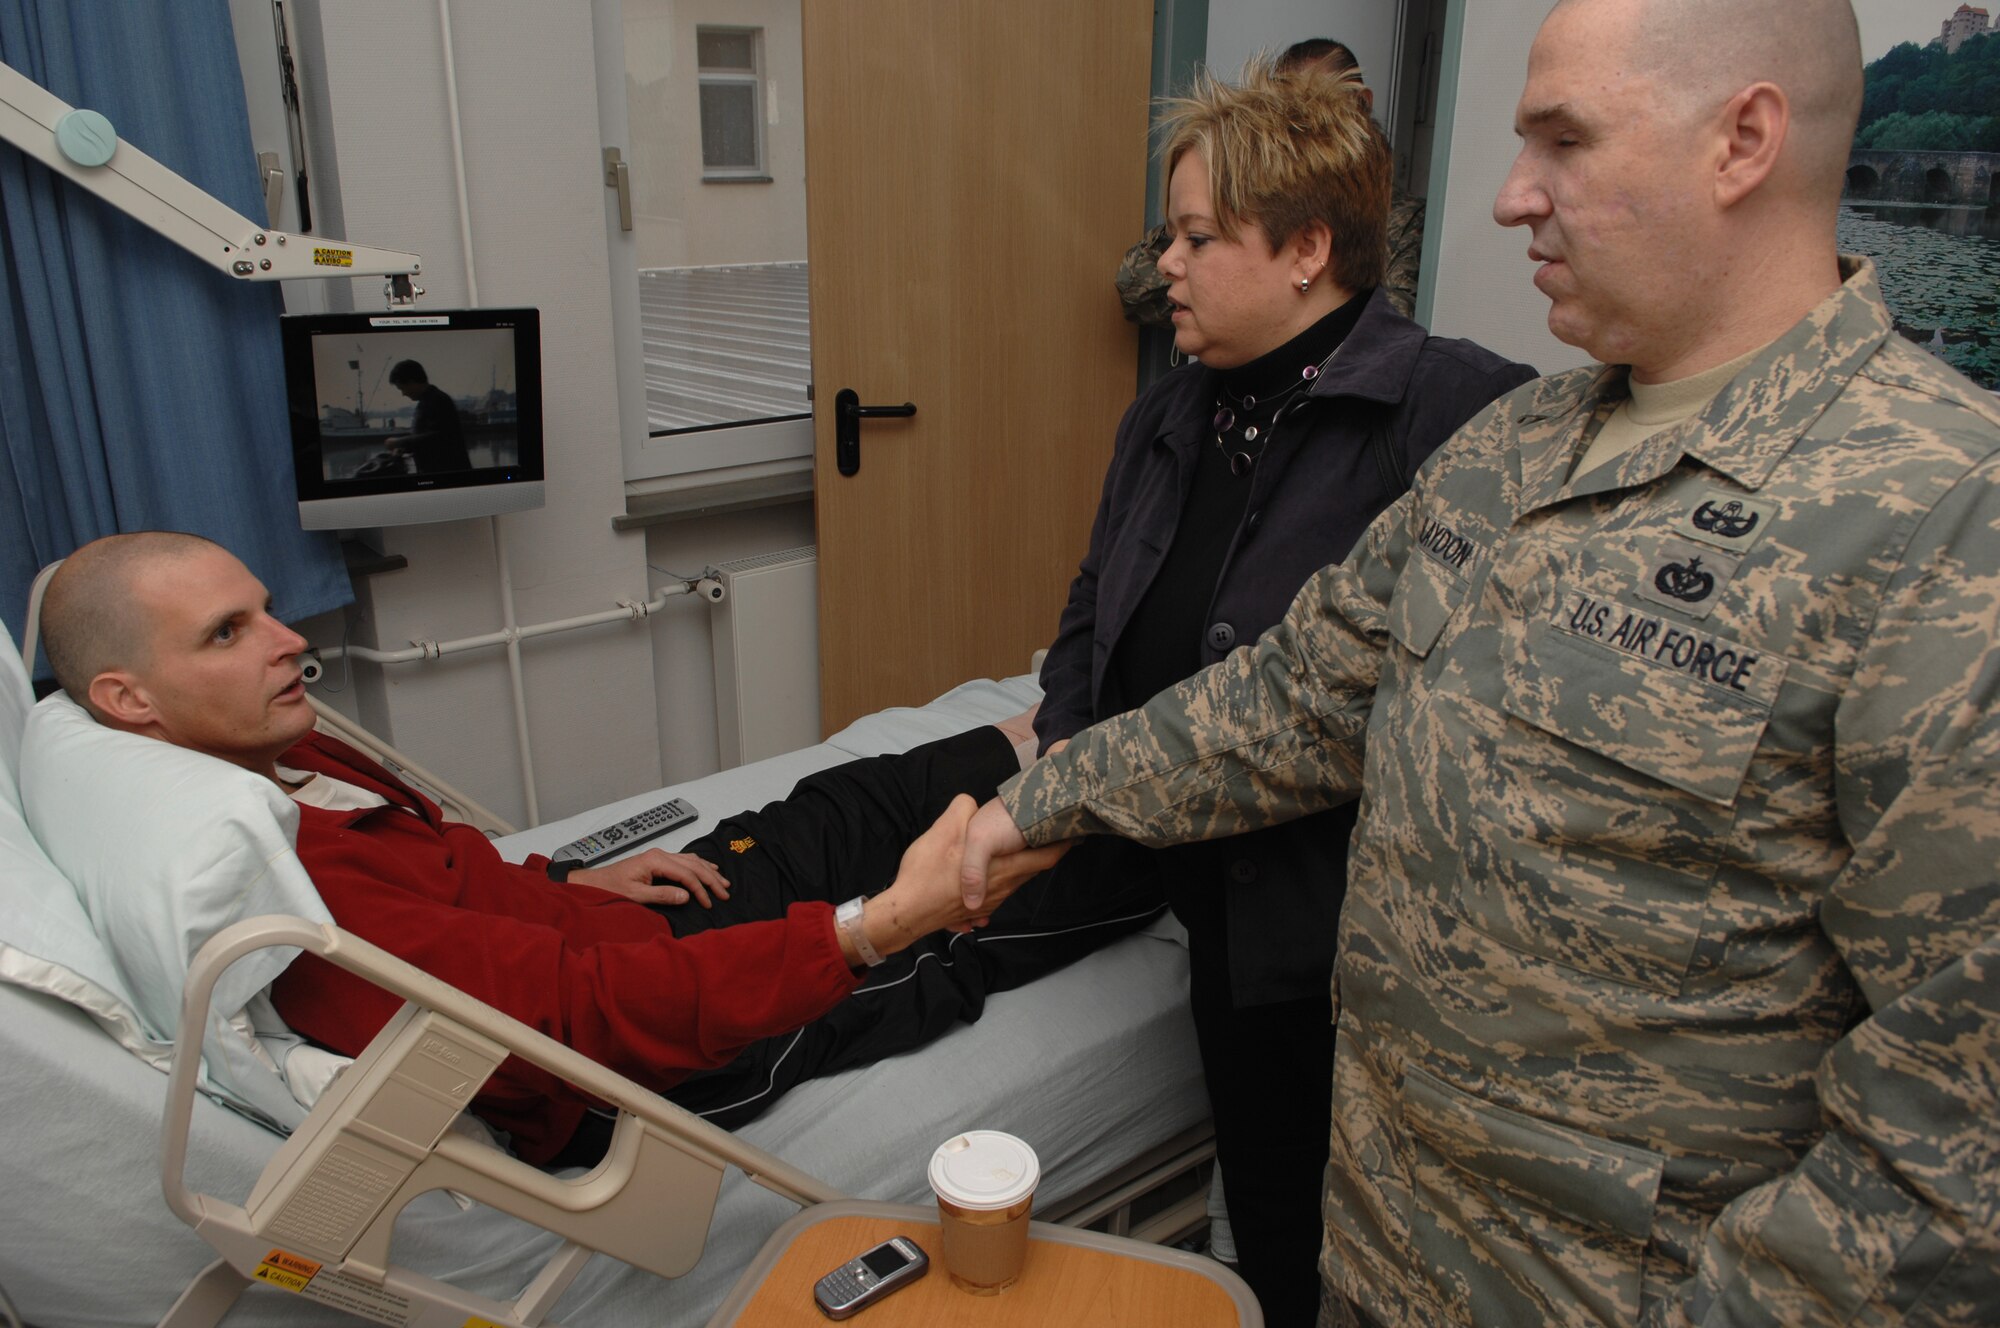 Canadian Army Corporal Robbie Stephenson (left), injured by an improvised explosive device blast during a convoy while deployed in Afghanistan, is visited by Staff Sgt. Matthew Slaydon and his wife, Annette, Landstuhl Regional Medical Center, Germany, Nov. 21, 2008. Sgt. Slaydon was severely injured in Iraq 13 months ago during a deployment there as an explosive ordinance disposal technician and is visiting LRMC as part of a morale tour, following his recovery. (U.S. Air Force photo by Airman 1st Class Tony R. Ritter)